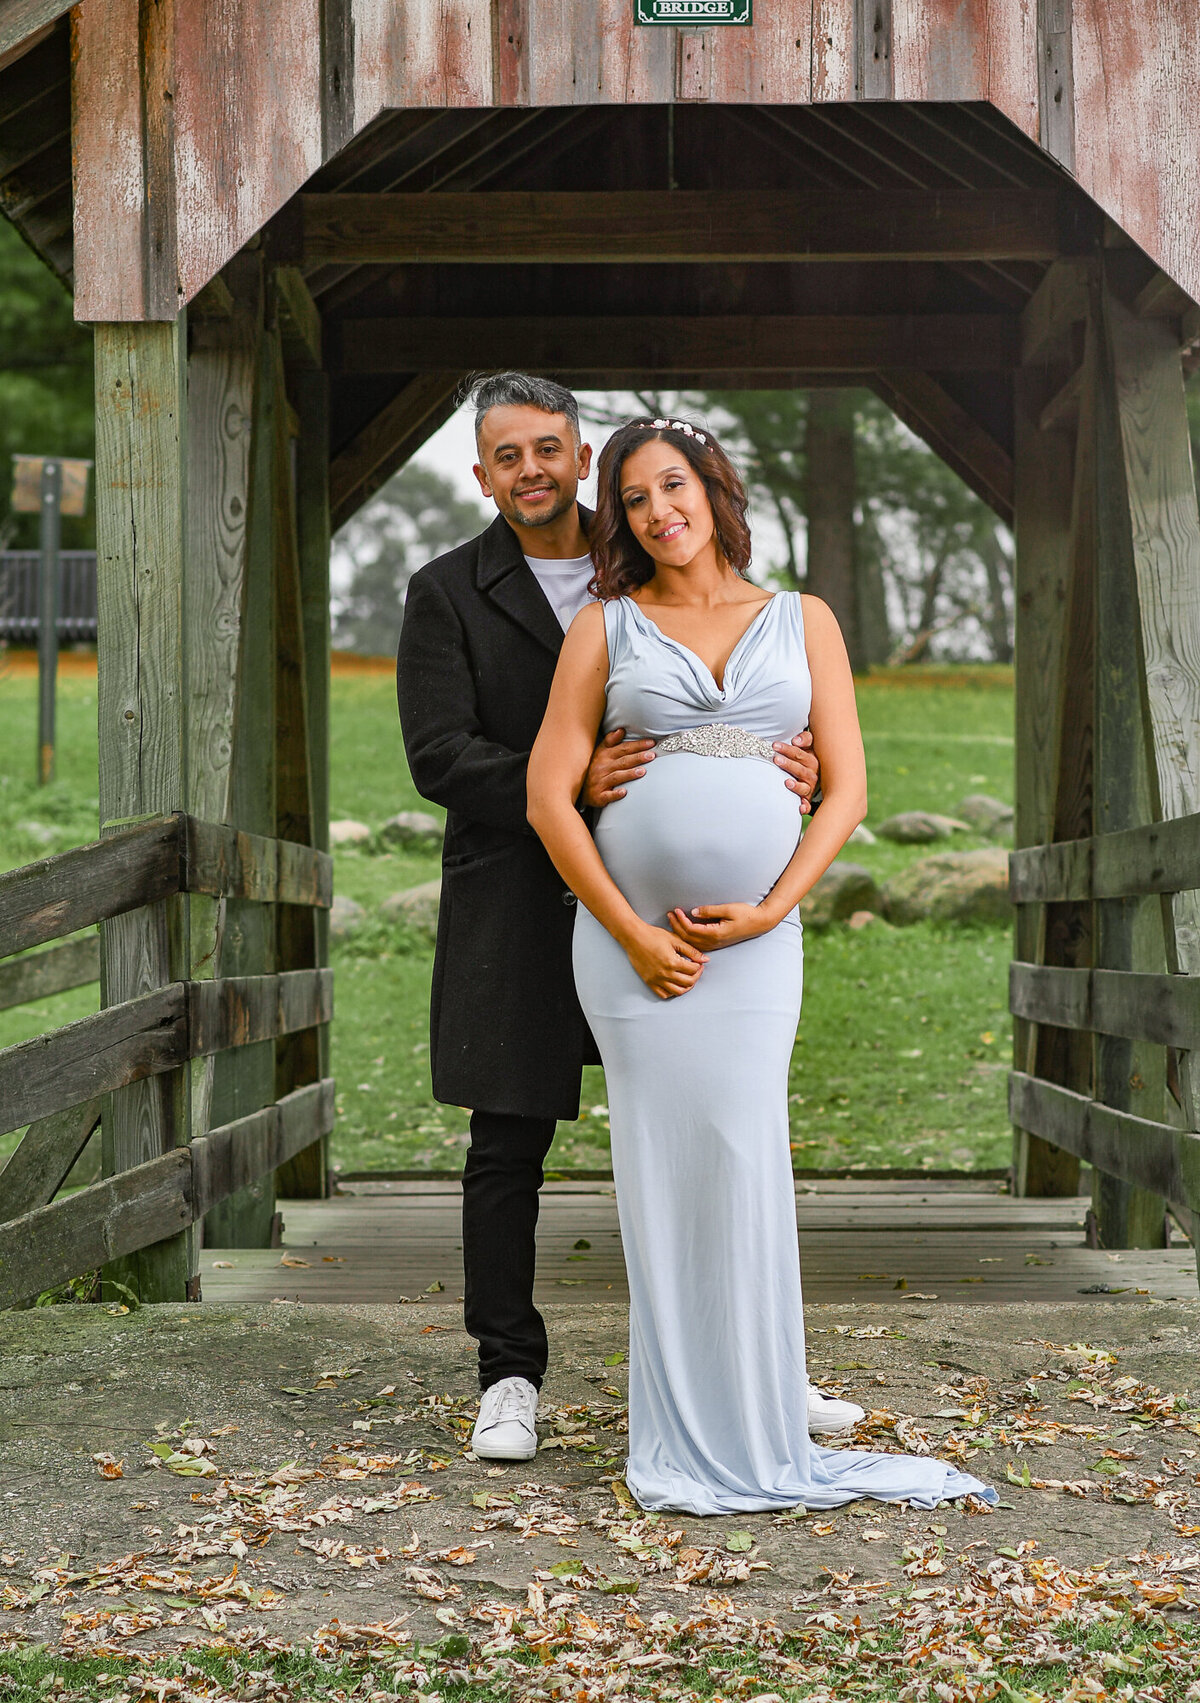 Man wearing a long black coat standing on a covered bridge with his pregnant wife smiling at the camera